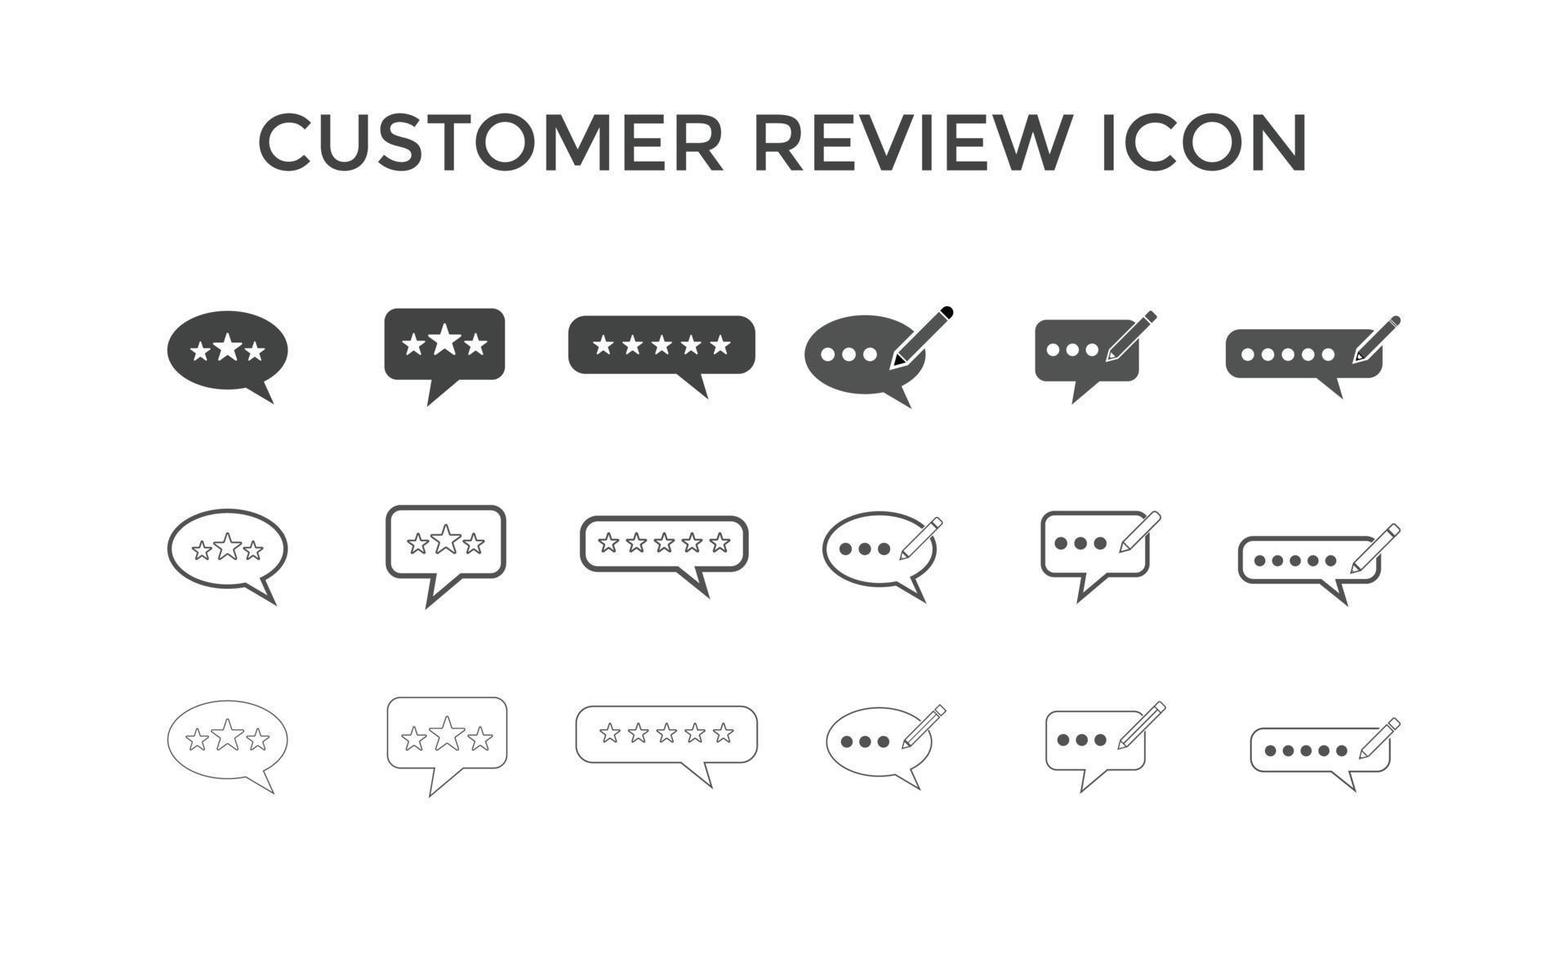 Set of Feedback or Customer review icons Vector illustration. Customer 5 star review sign symbol for SEO, web and mobile apps